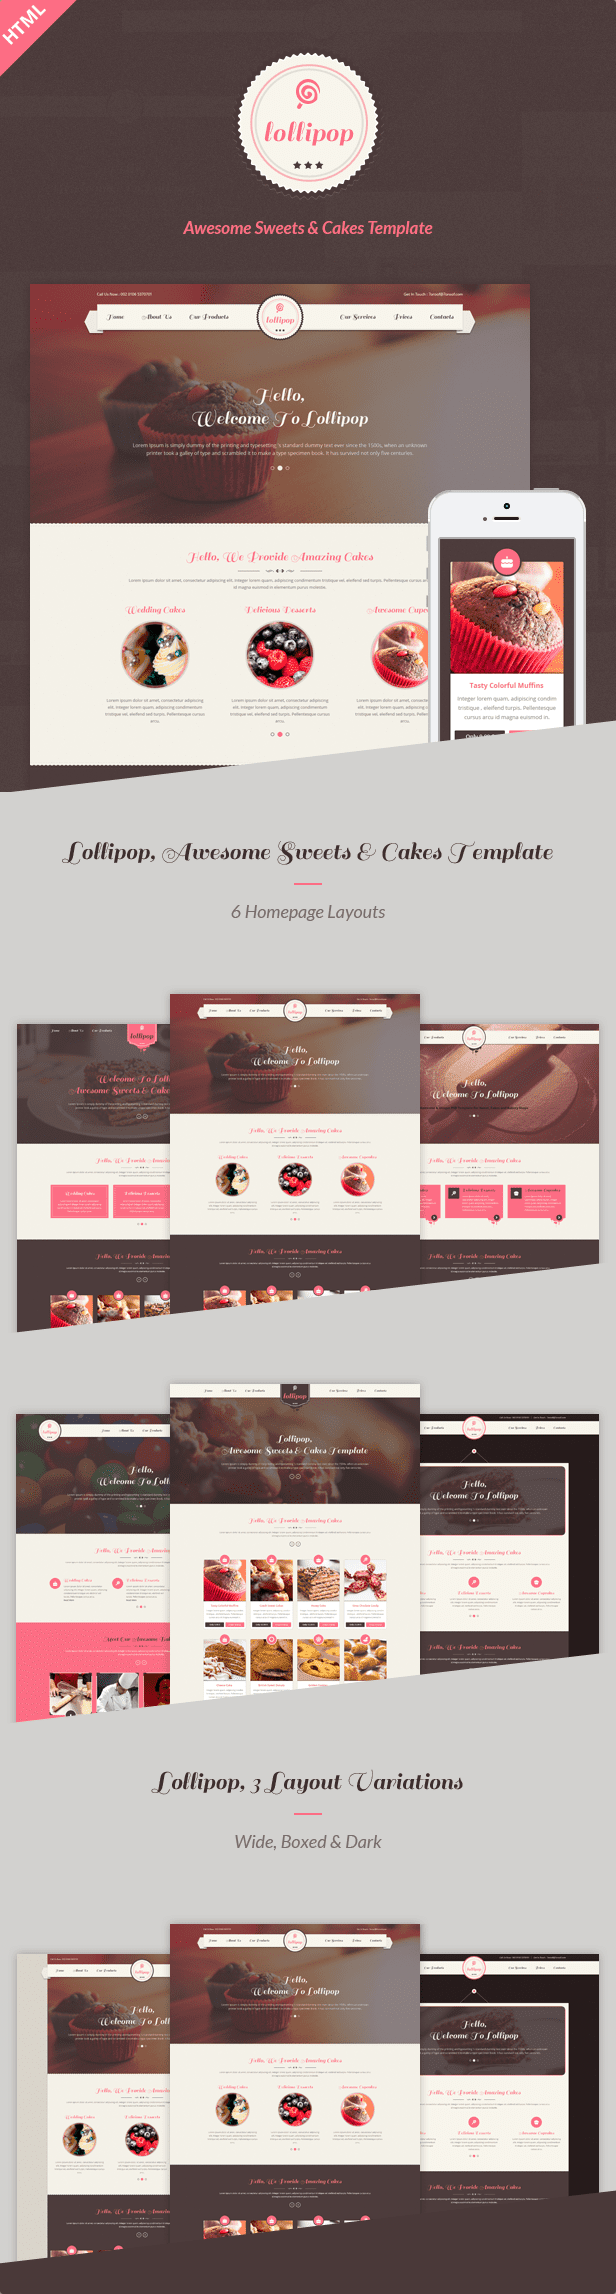 Lollipop - Awesome Sweets & Cakes Template